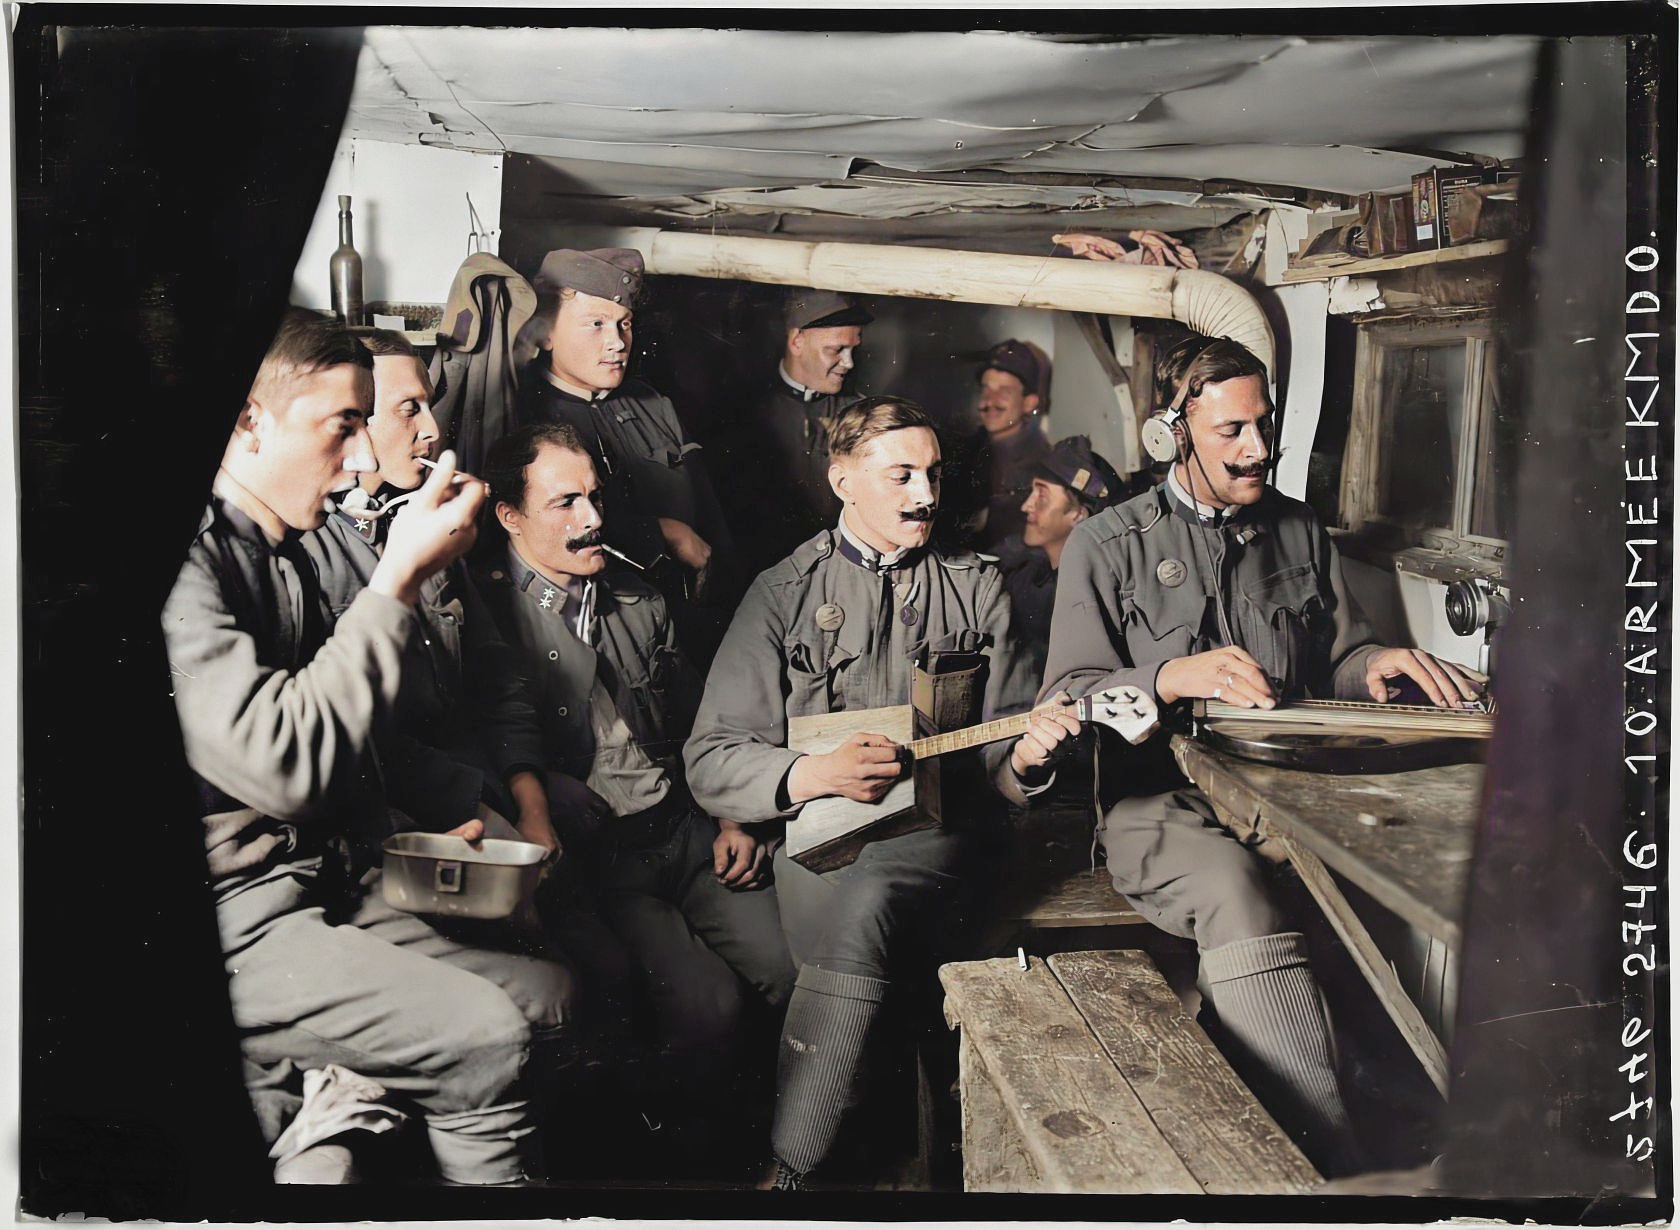 Habsburg officers playing music into radio transmitters that broadcast it to soldiers in nearby trenches, WW1, 1917 (Colorized).jpg